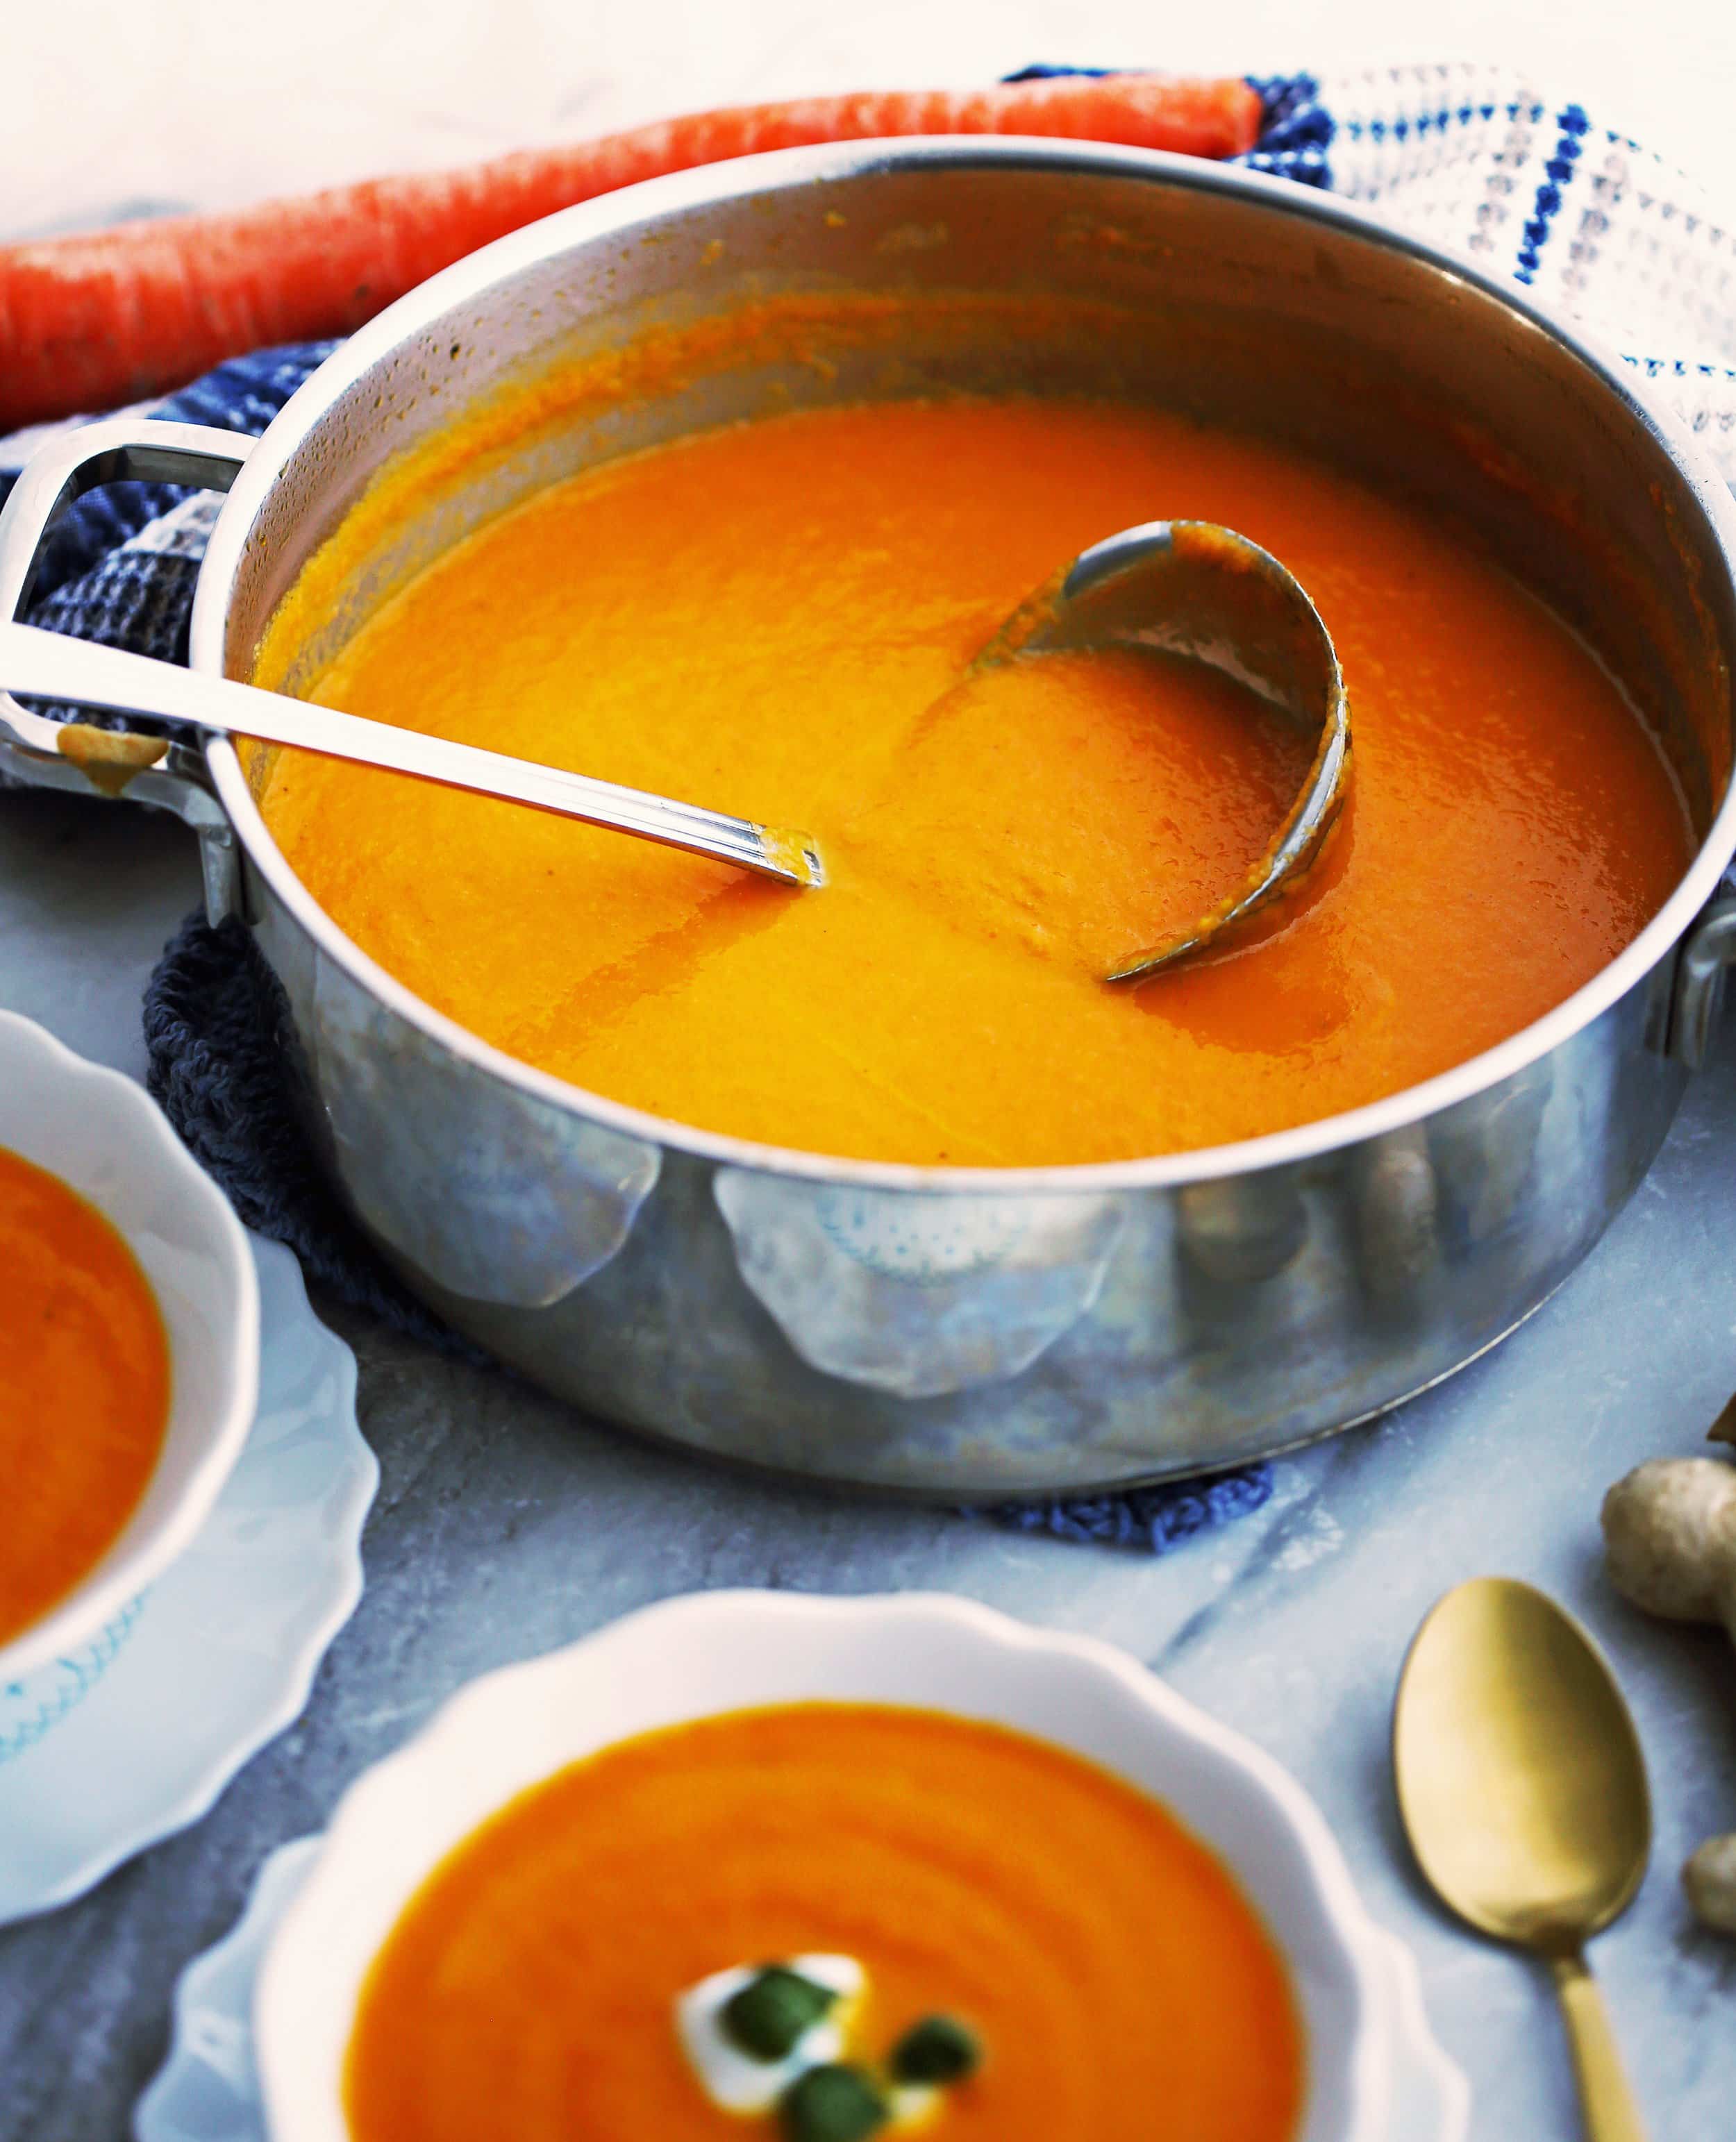 Healthy vegan carrot orange ginger soup in a large pot with ladle; bowls of soup around it.